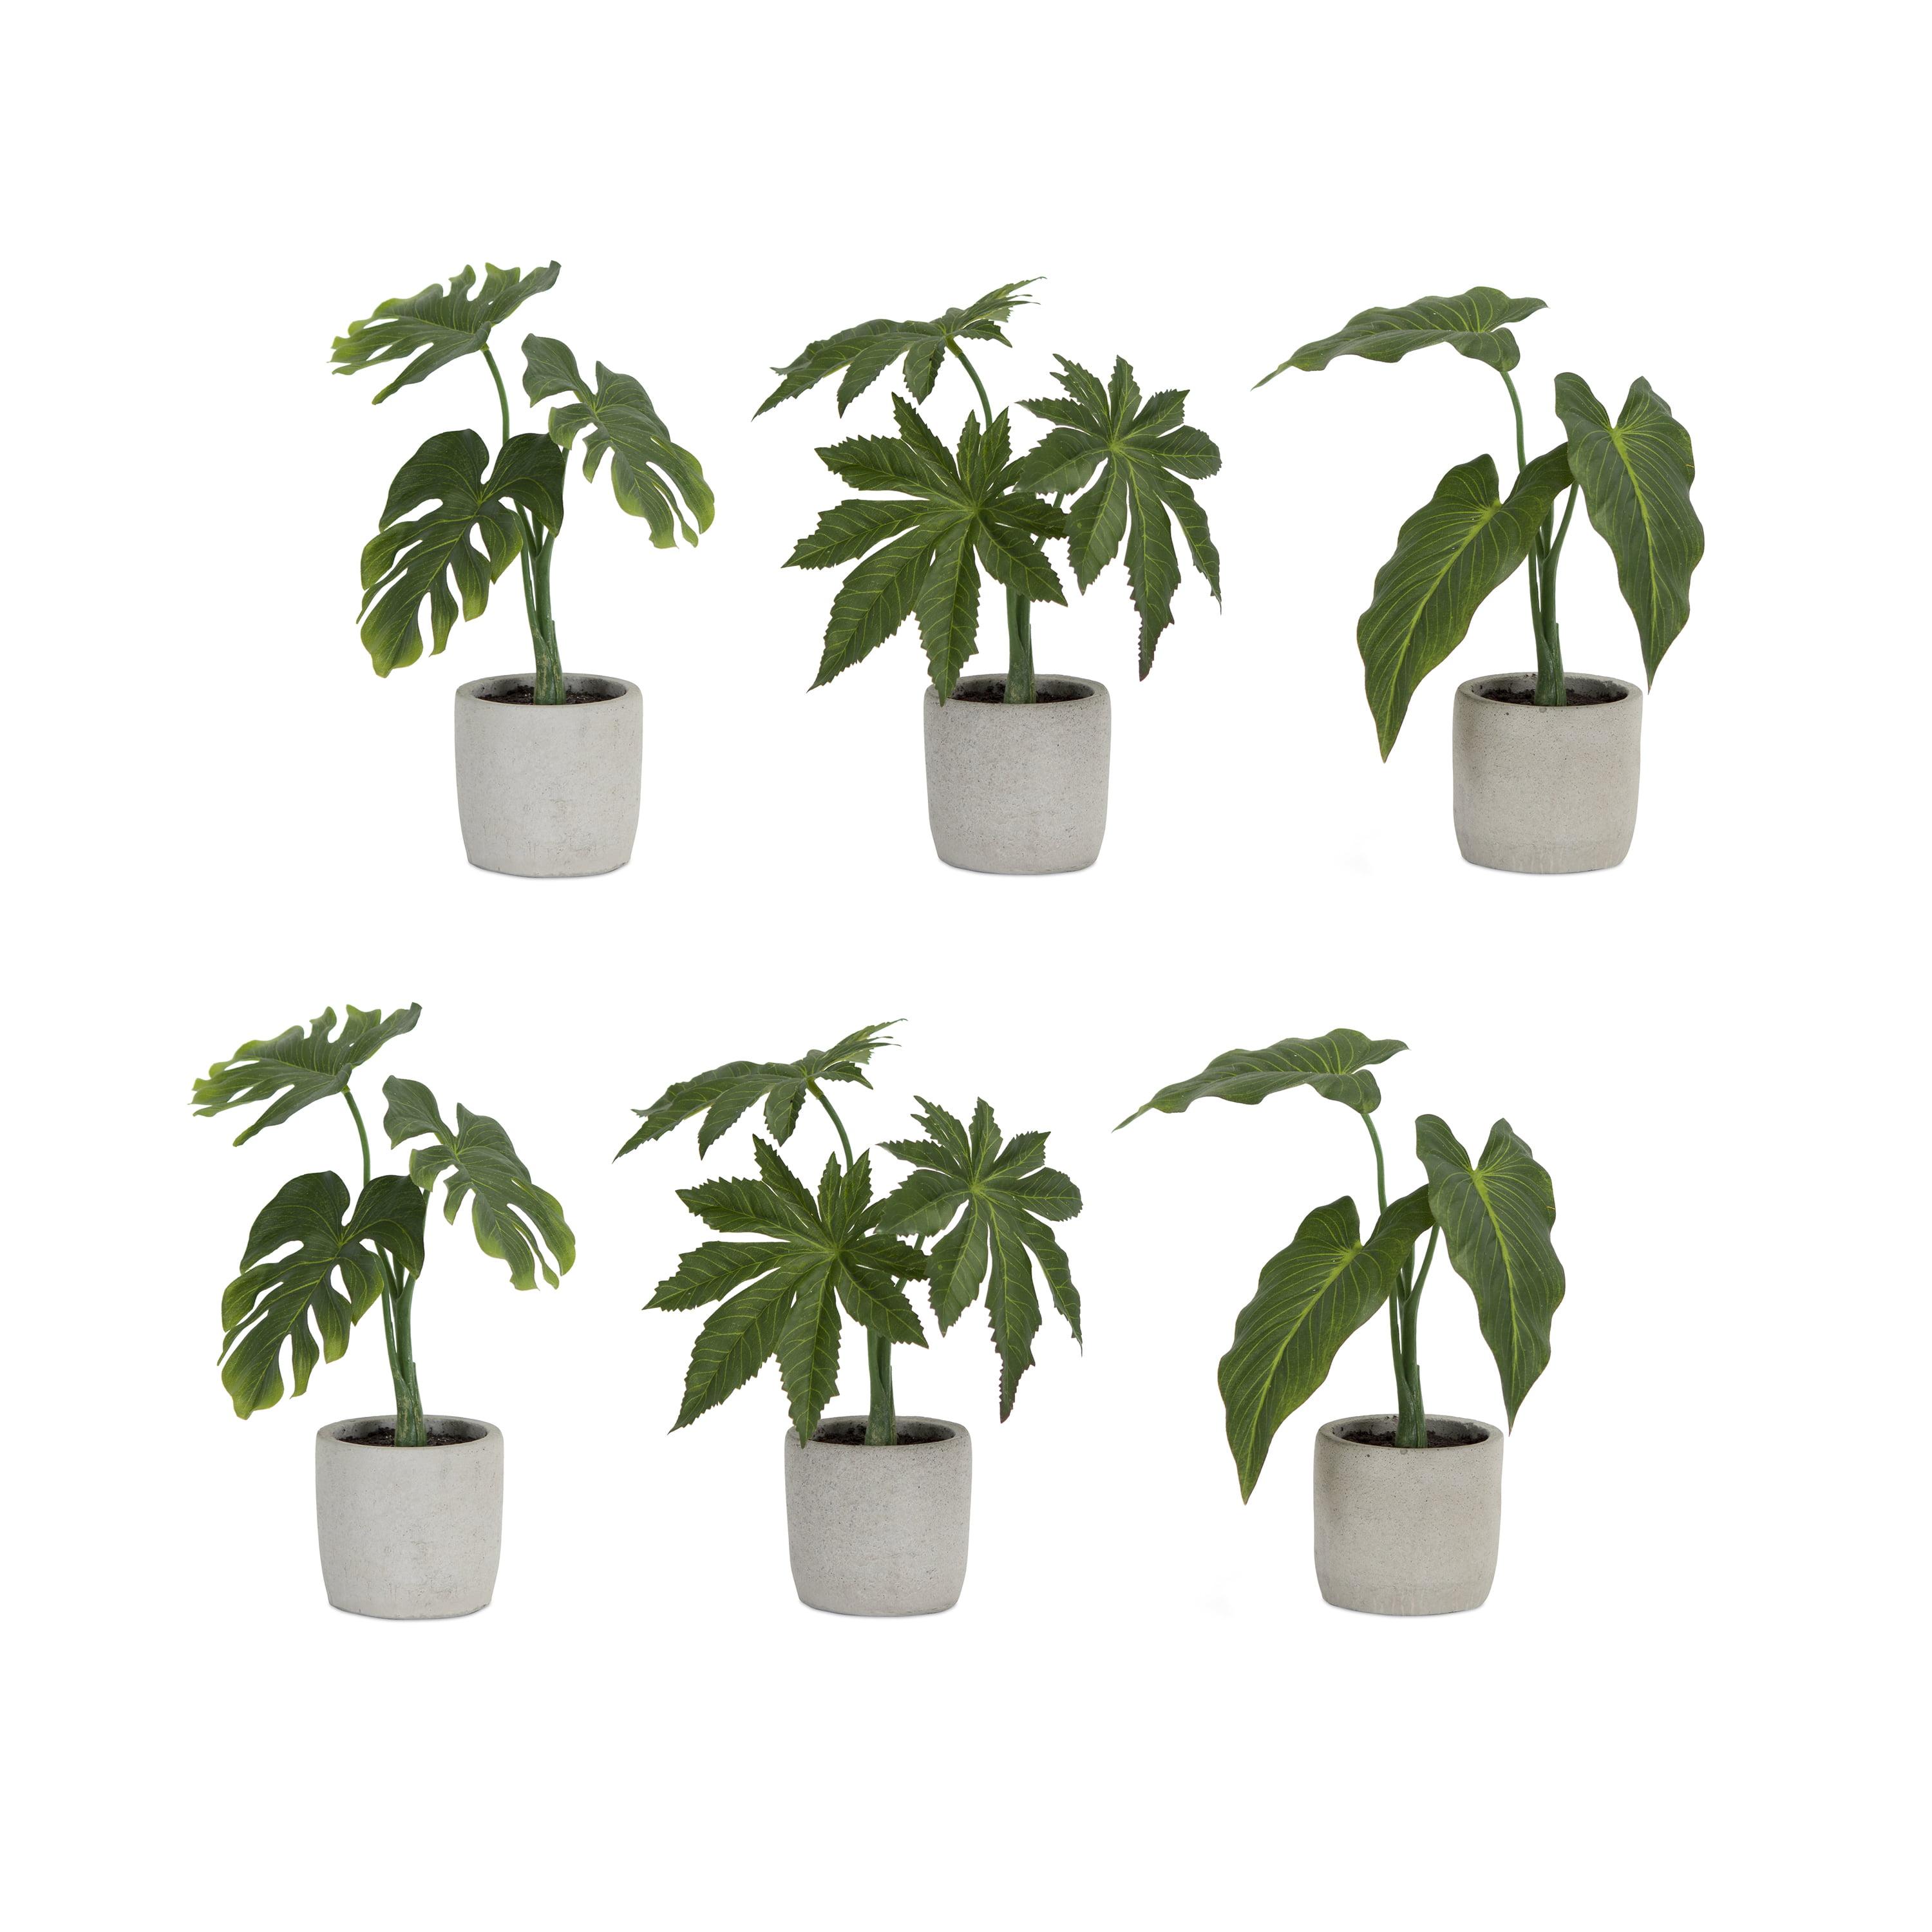 Evergreen Bliss 11.5" Green and White Potted Foliage Set